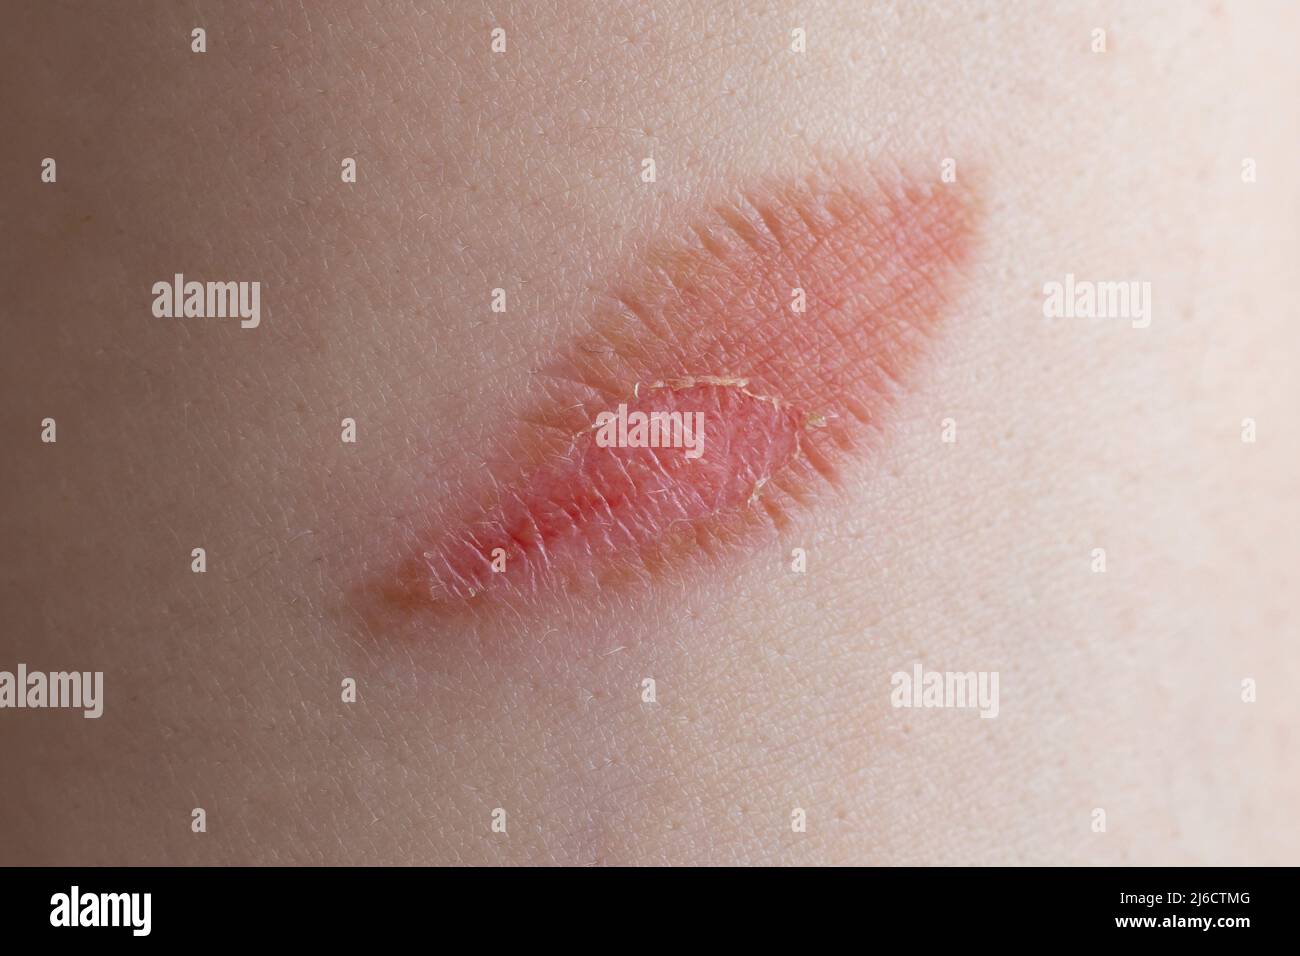 Leaf shaped burn wound on a woman's fore arm, macro skin texture Stock Photo